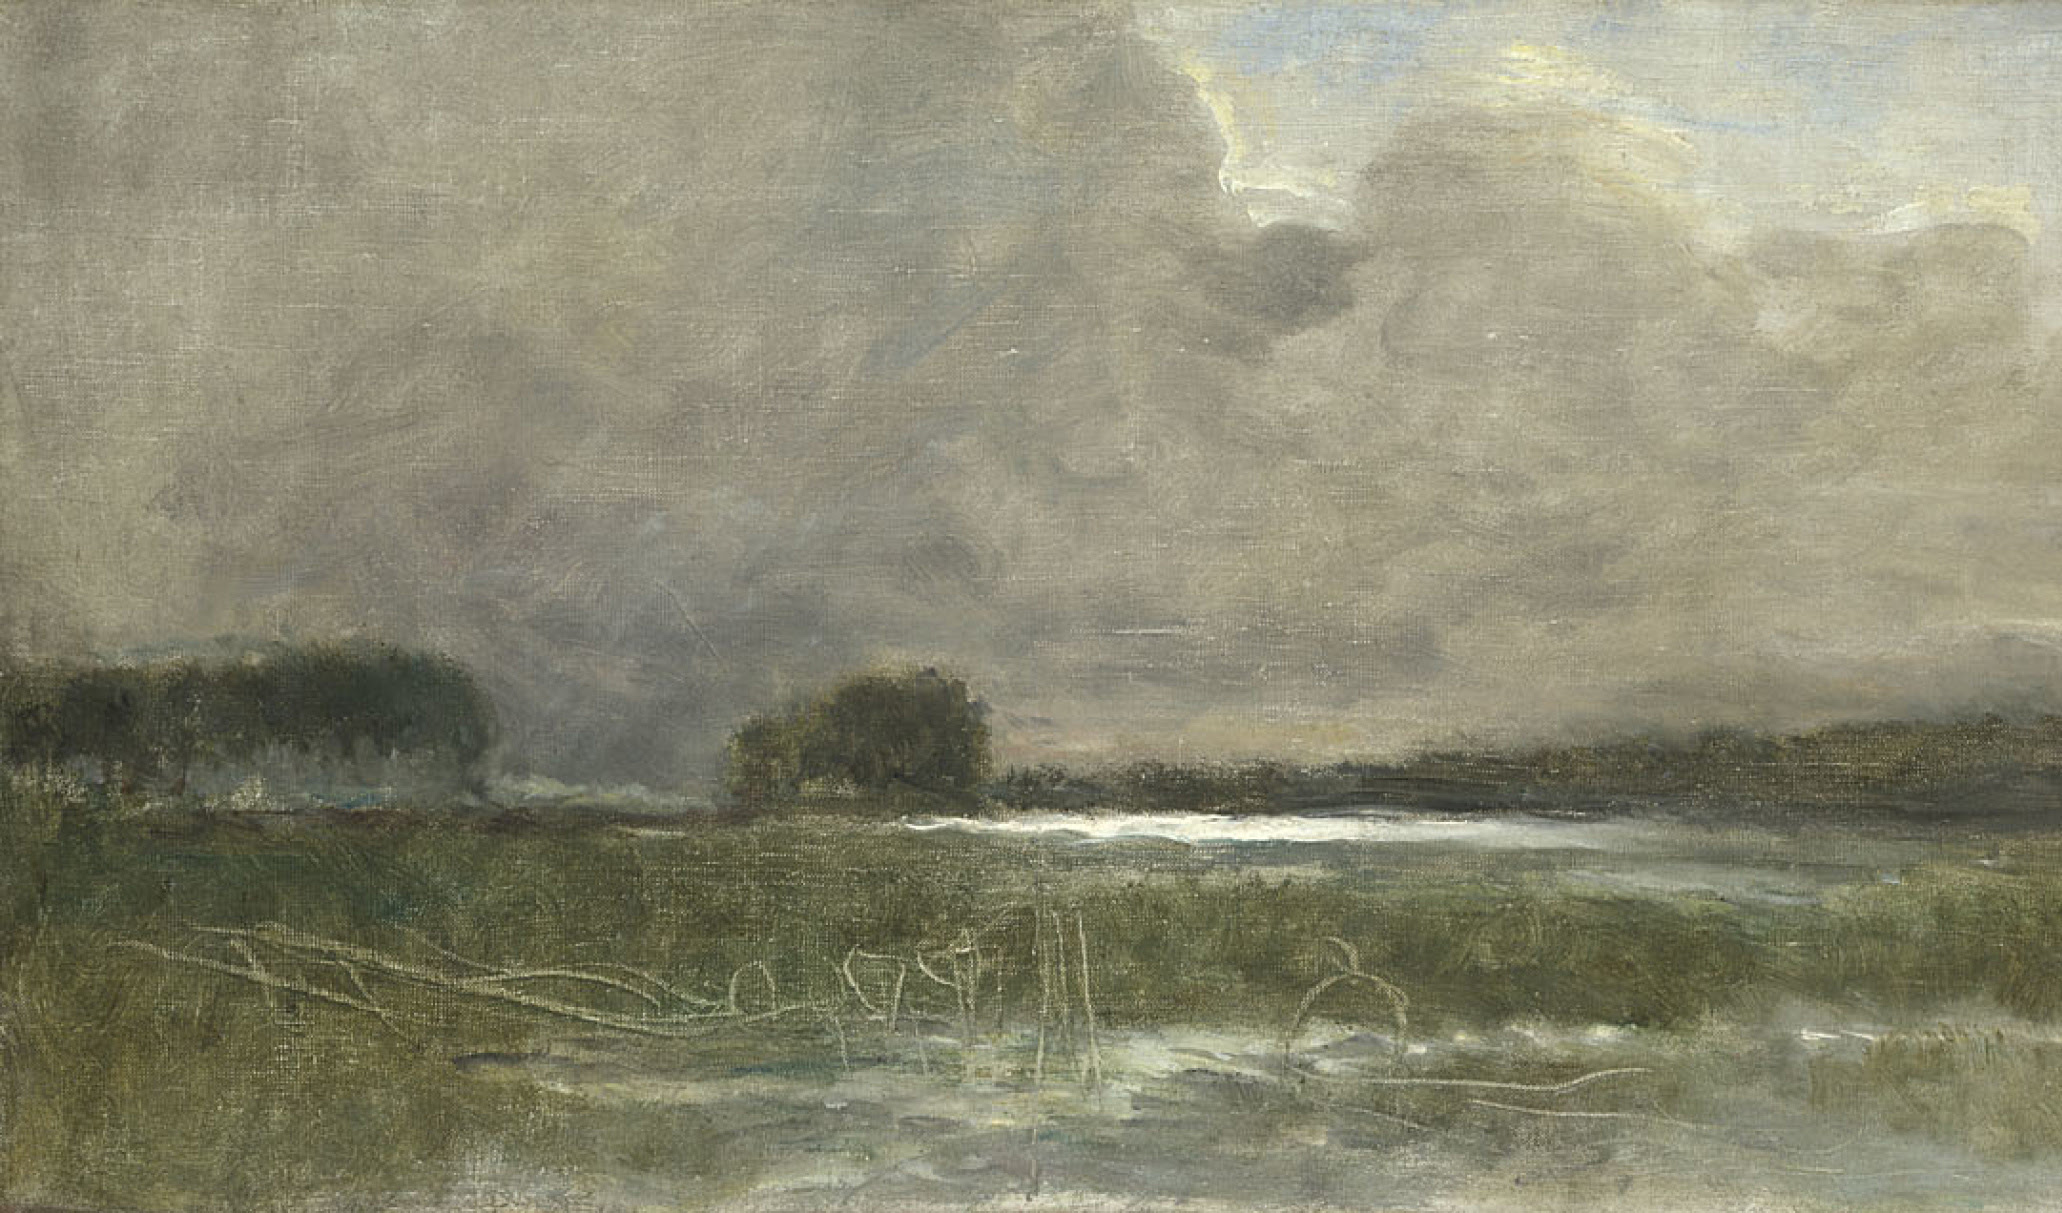 Detail from Jean-Baptiste-Camille Corot, 'The Marsh at Arleux', 1871 © The National Gallery, London